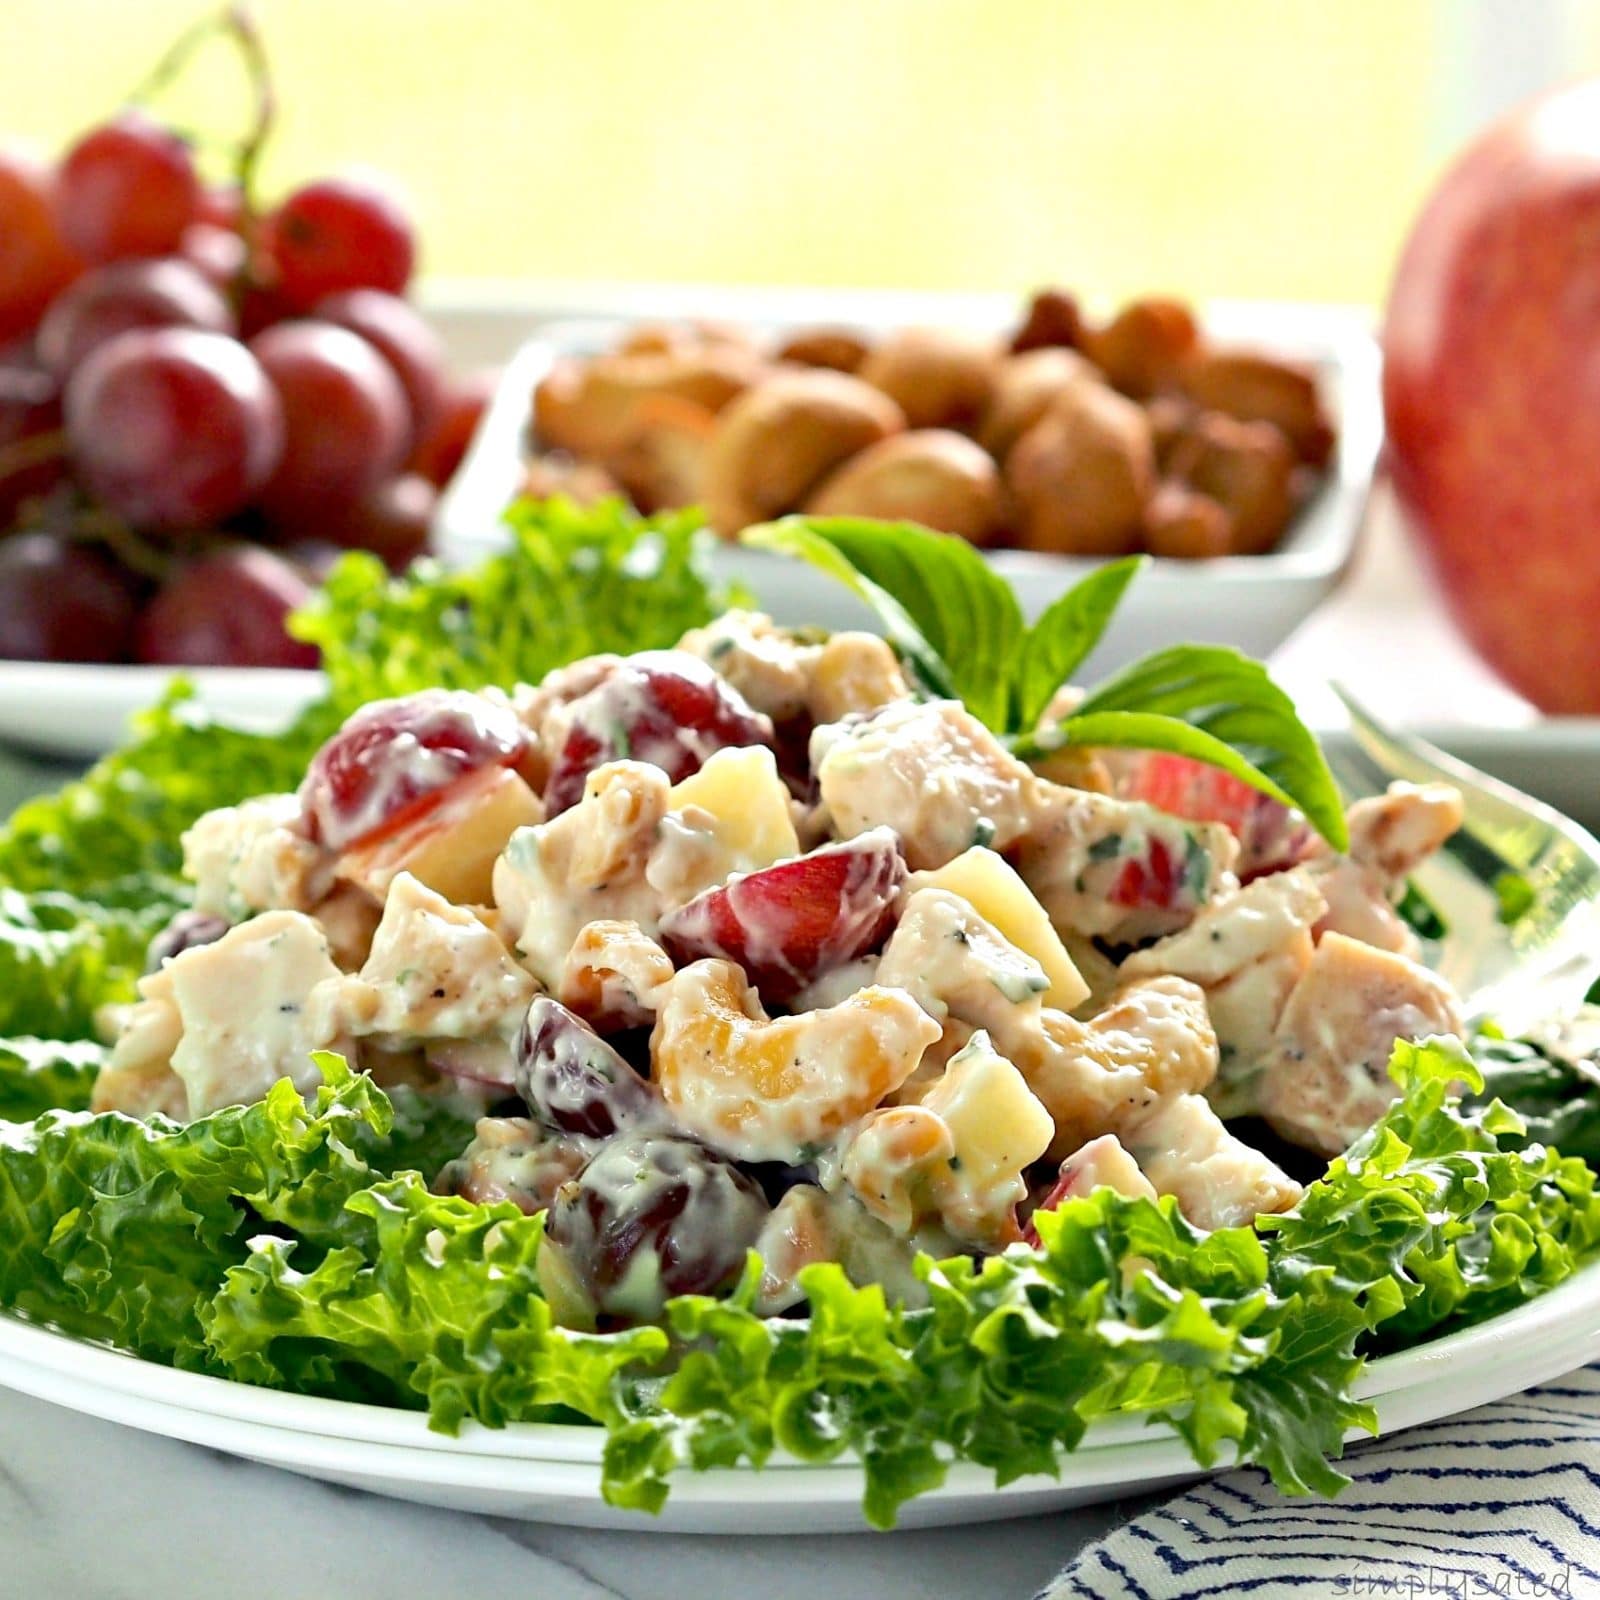 Grilled Black Pepper Chicken Salad is full of flavor, texture and tastes. Perfect served as a sandwich, salad or dip. www.simplysated.com